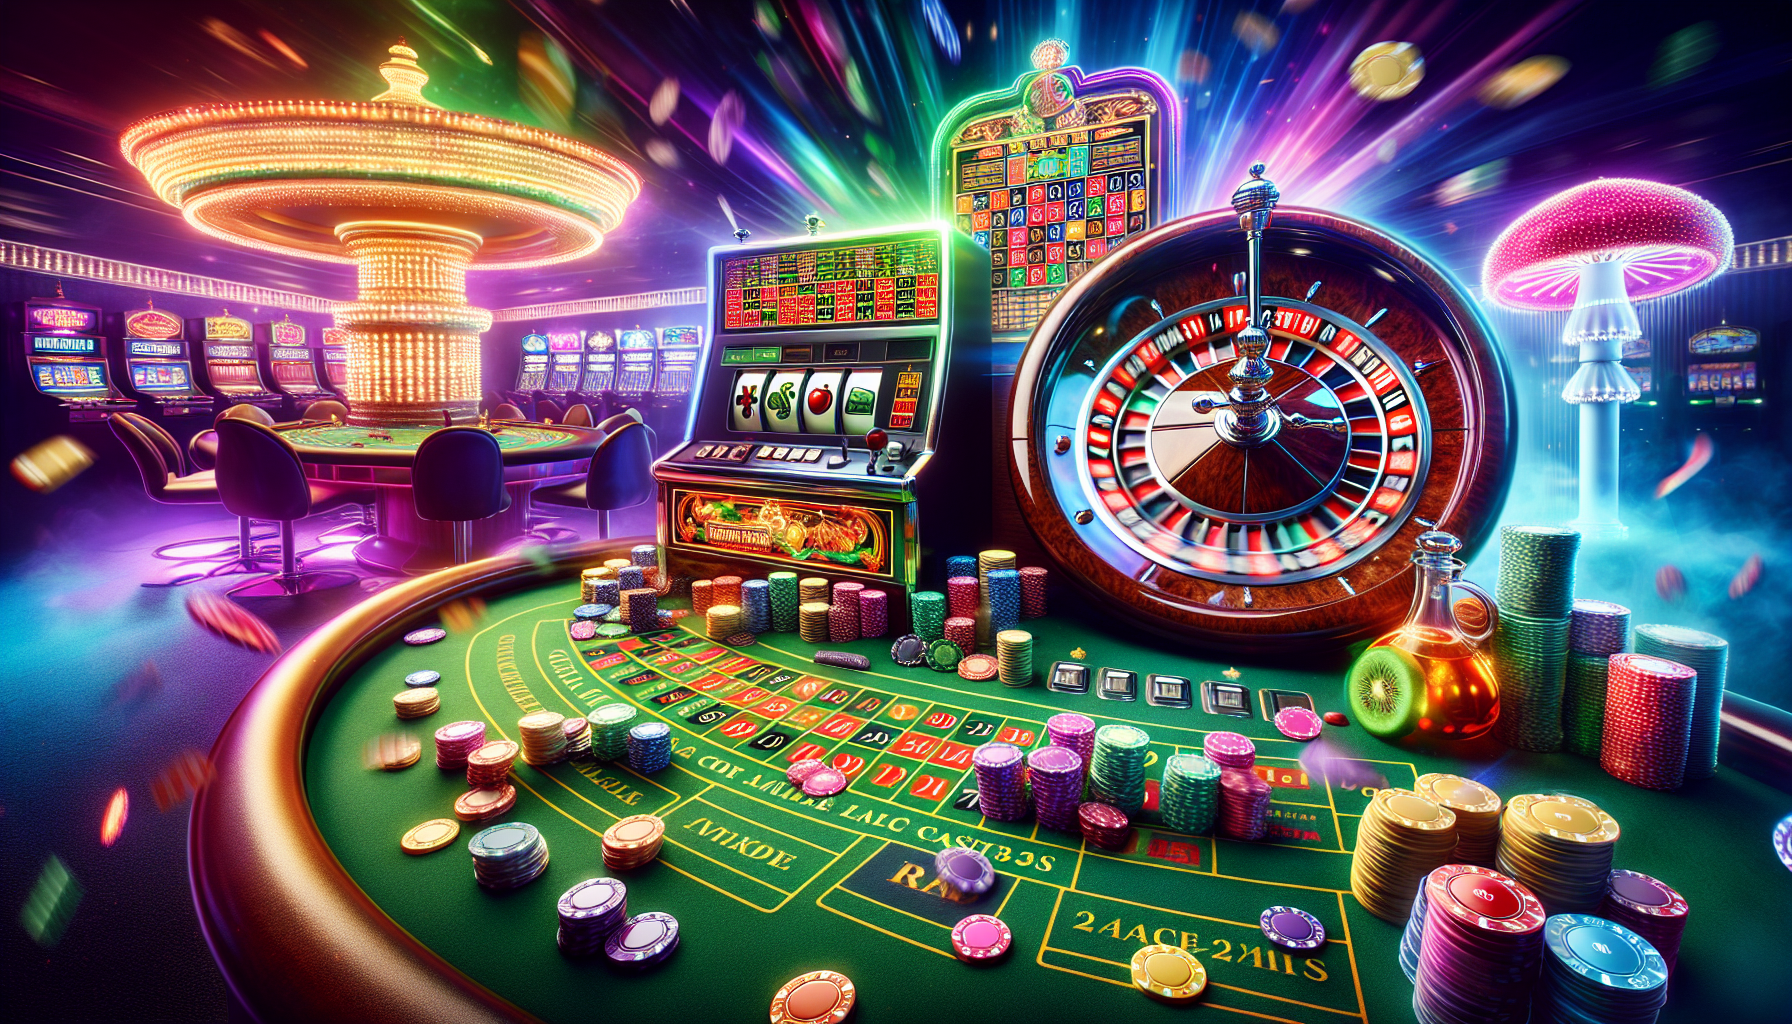 Real Money Casino Games Overview